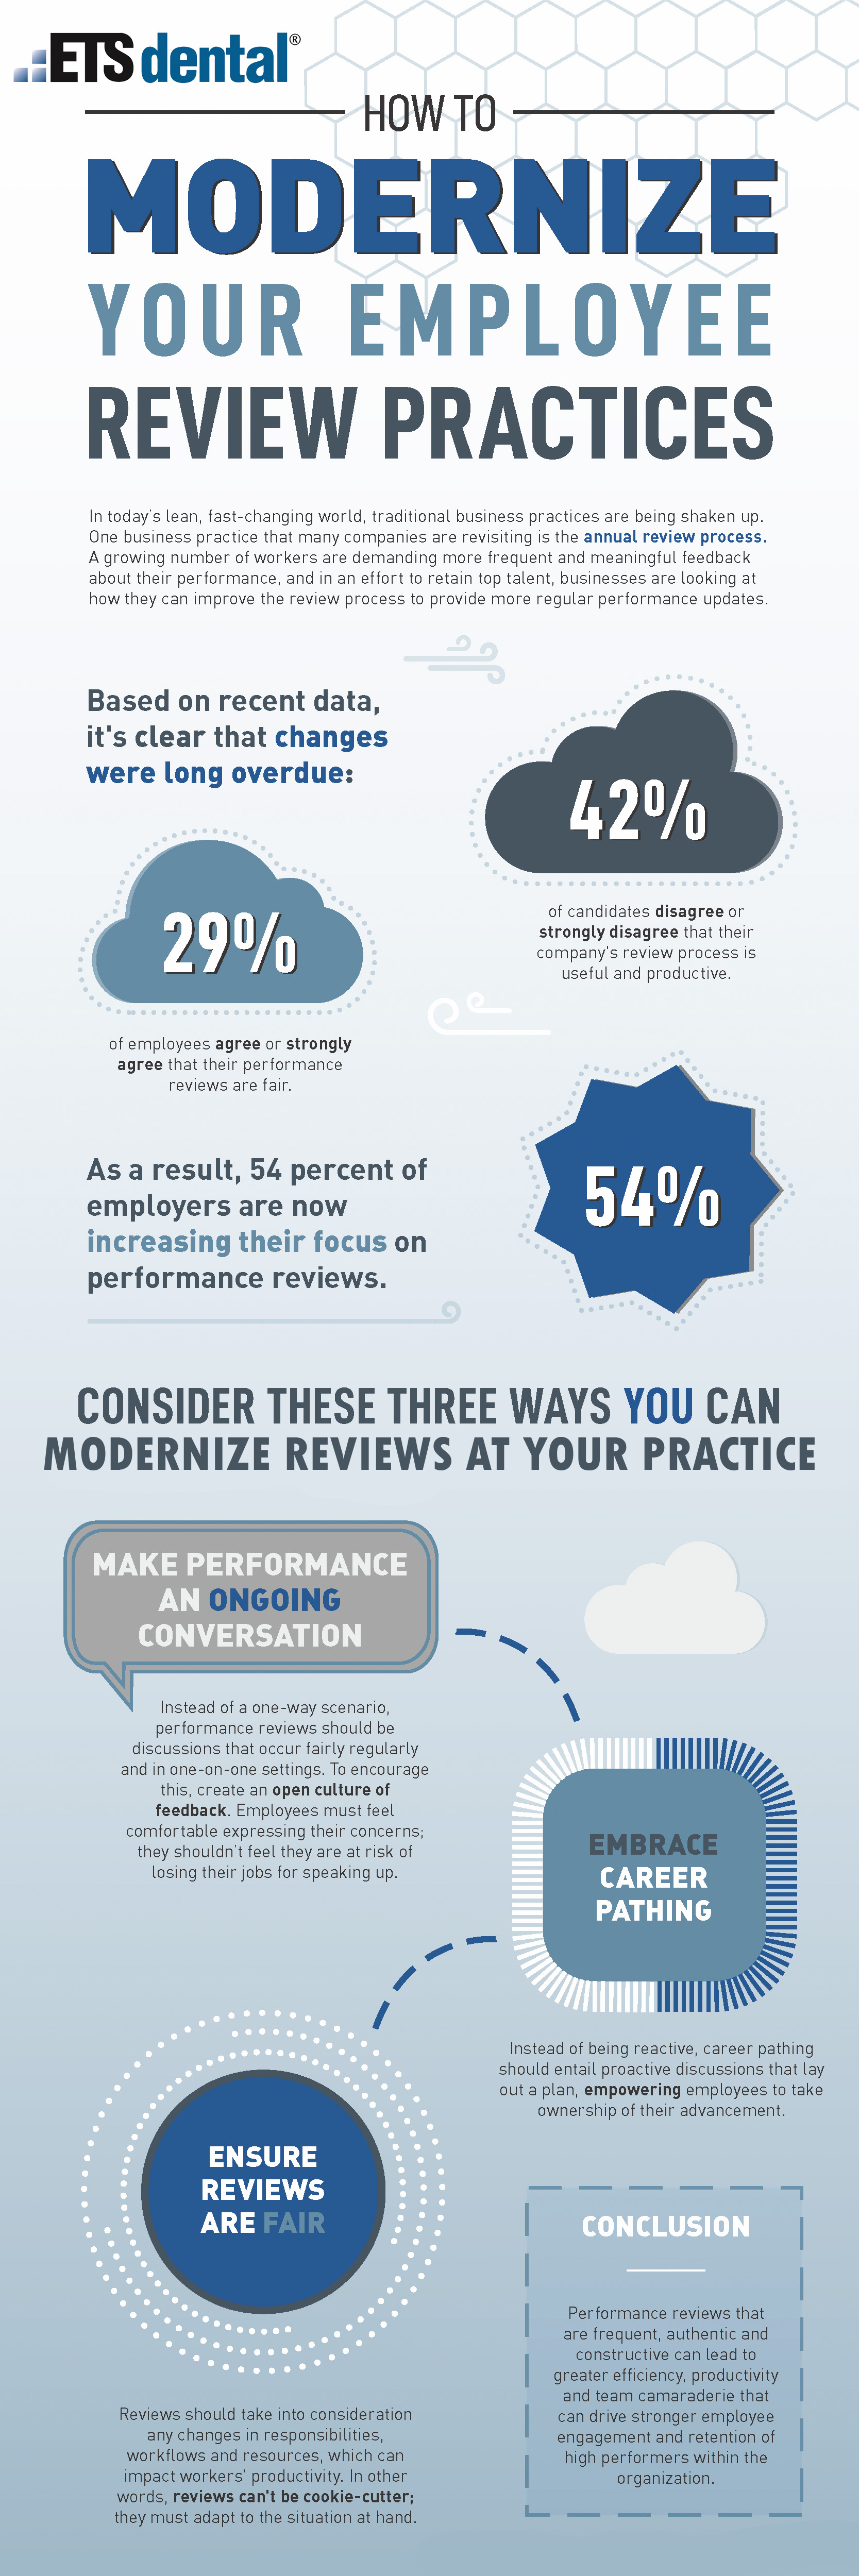 Modernize Employee Review Practices Infographic (Dental)